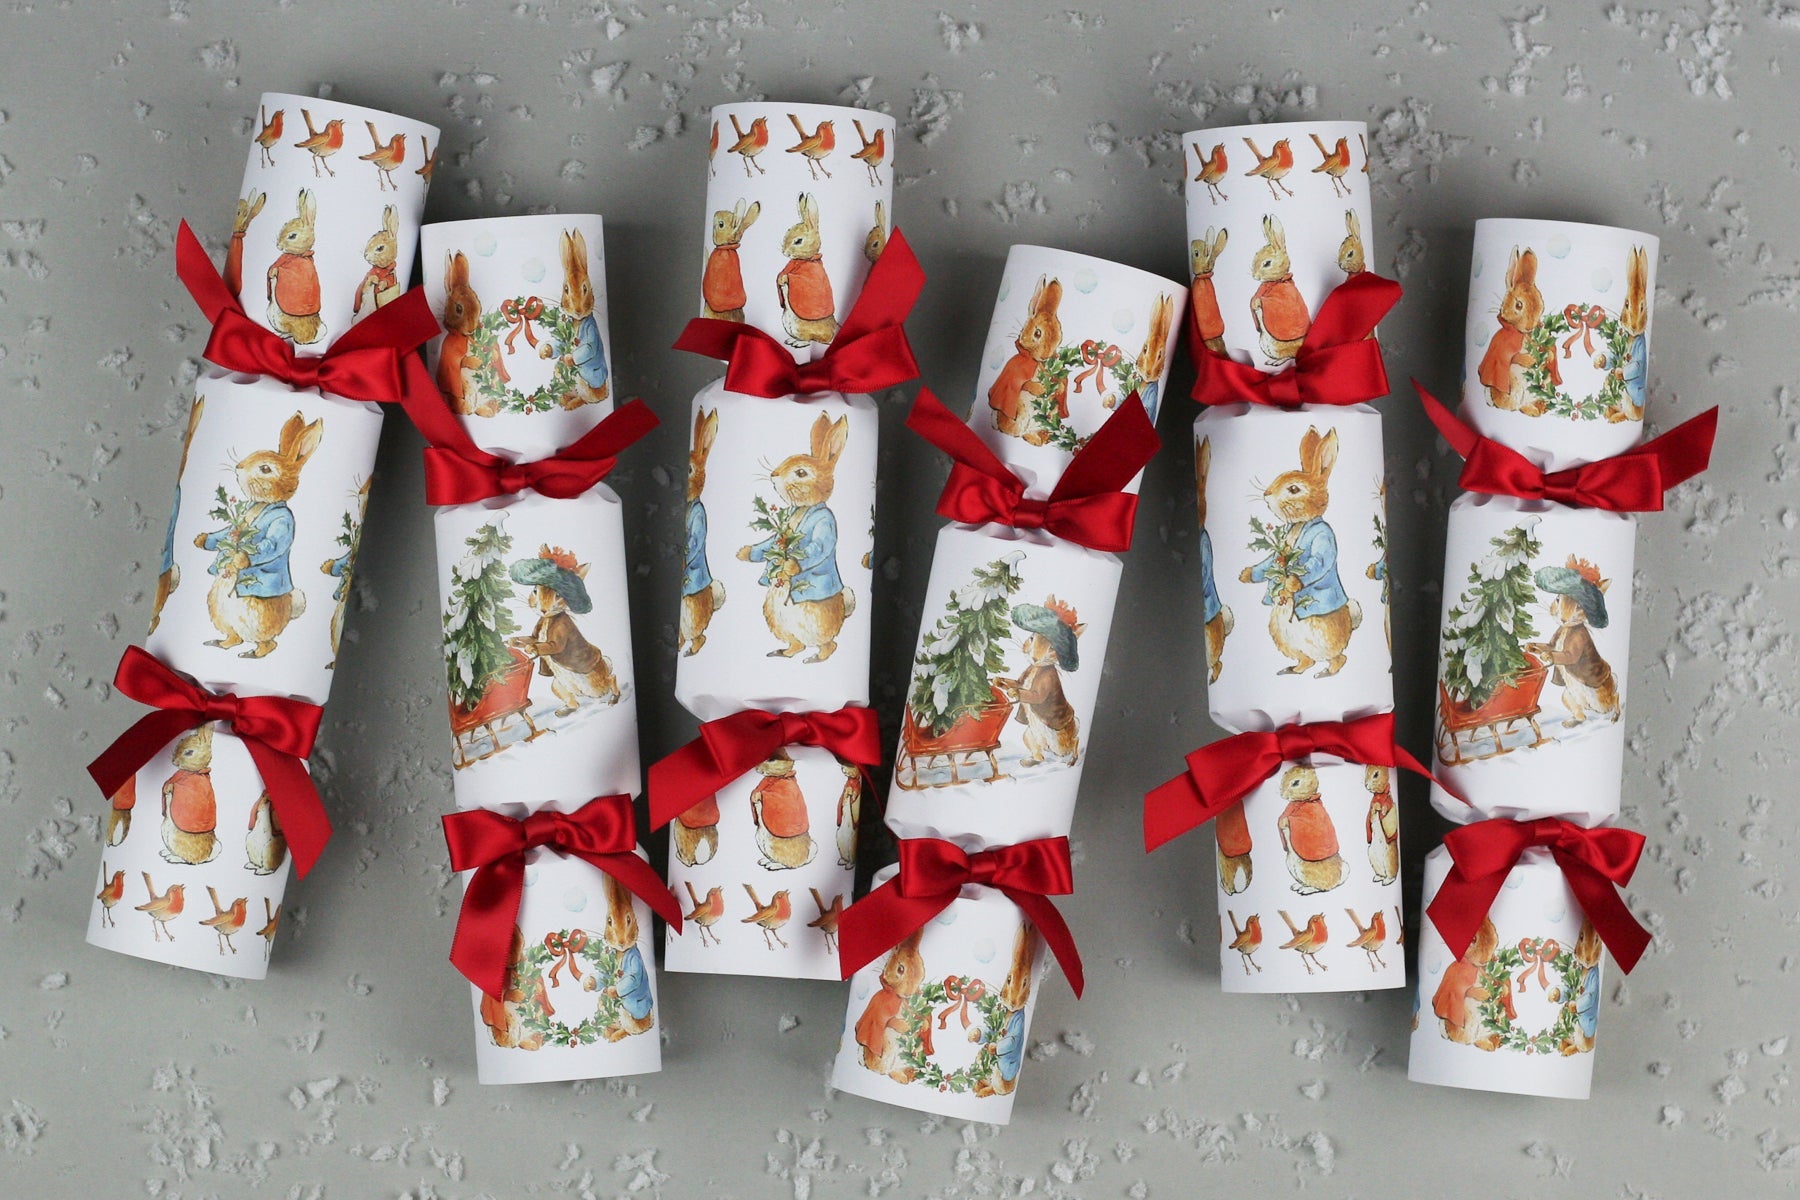 Nancy_and_Betty_Christmas_crackers_peter_rabbit_xmas_large_Portrait_b91c87f5-73ef-4c5c-b7b3-942fb3b32f6a.jpg